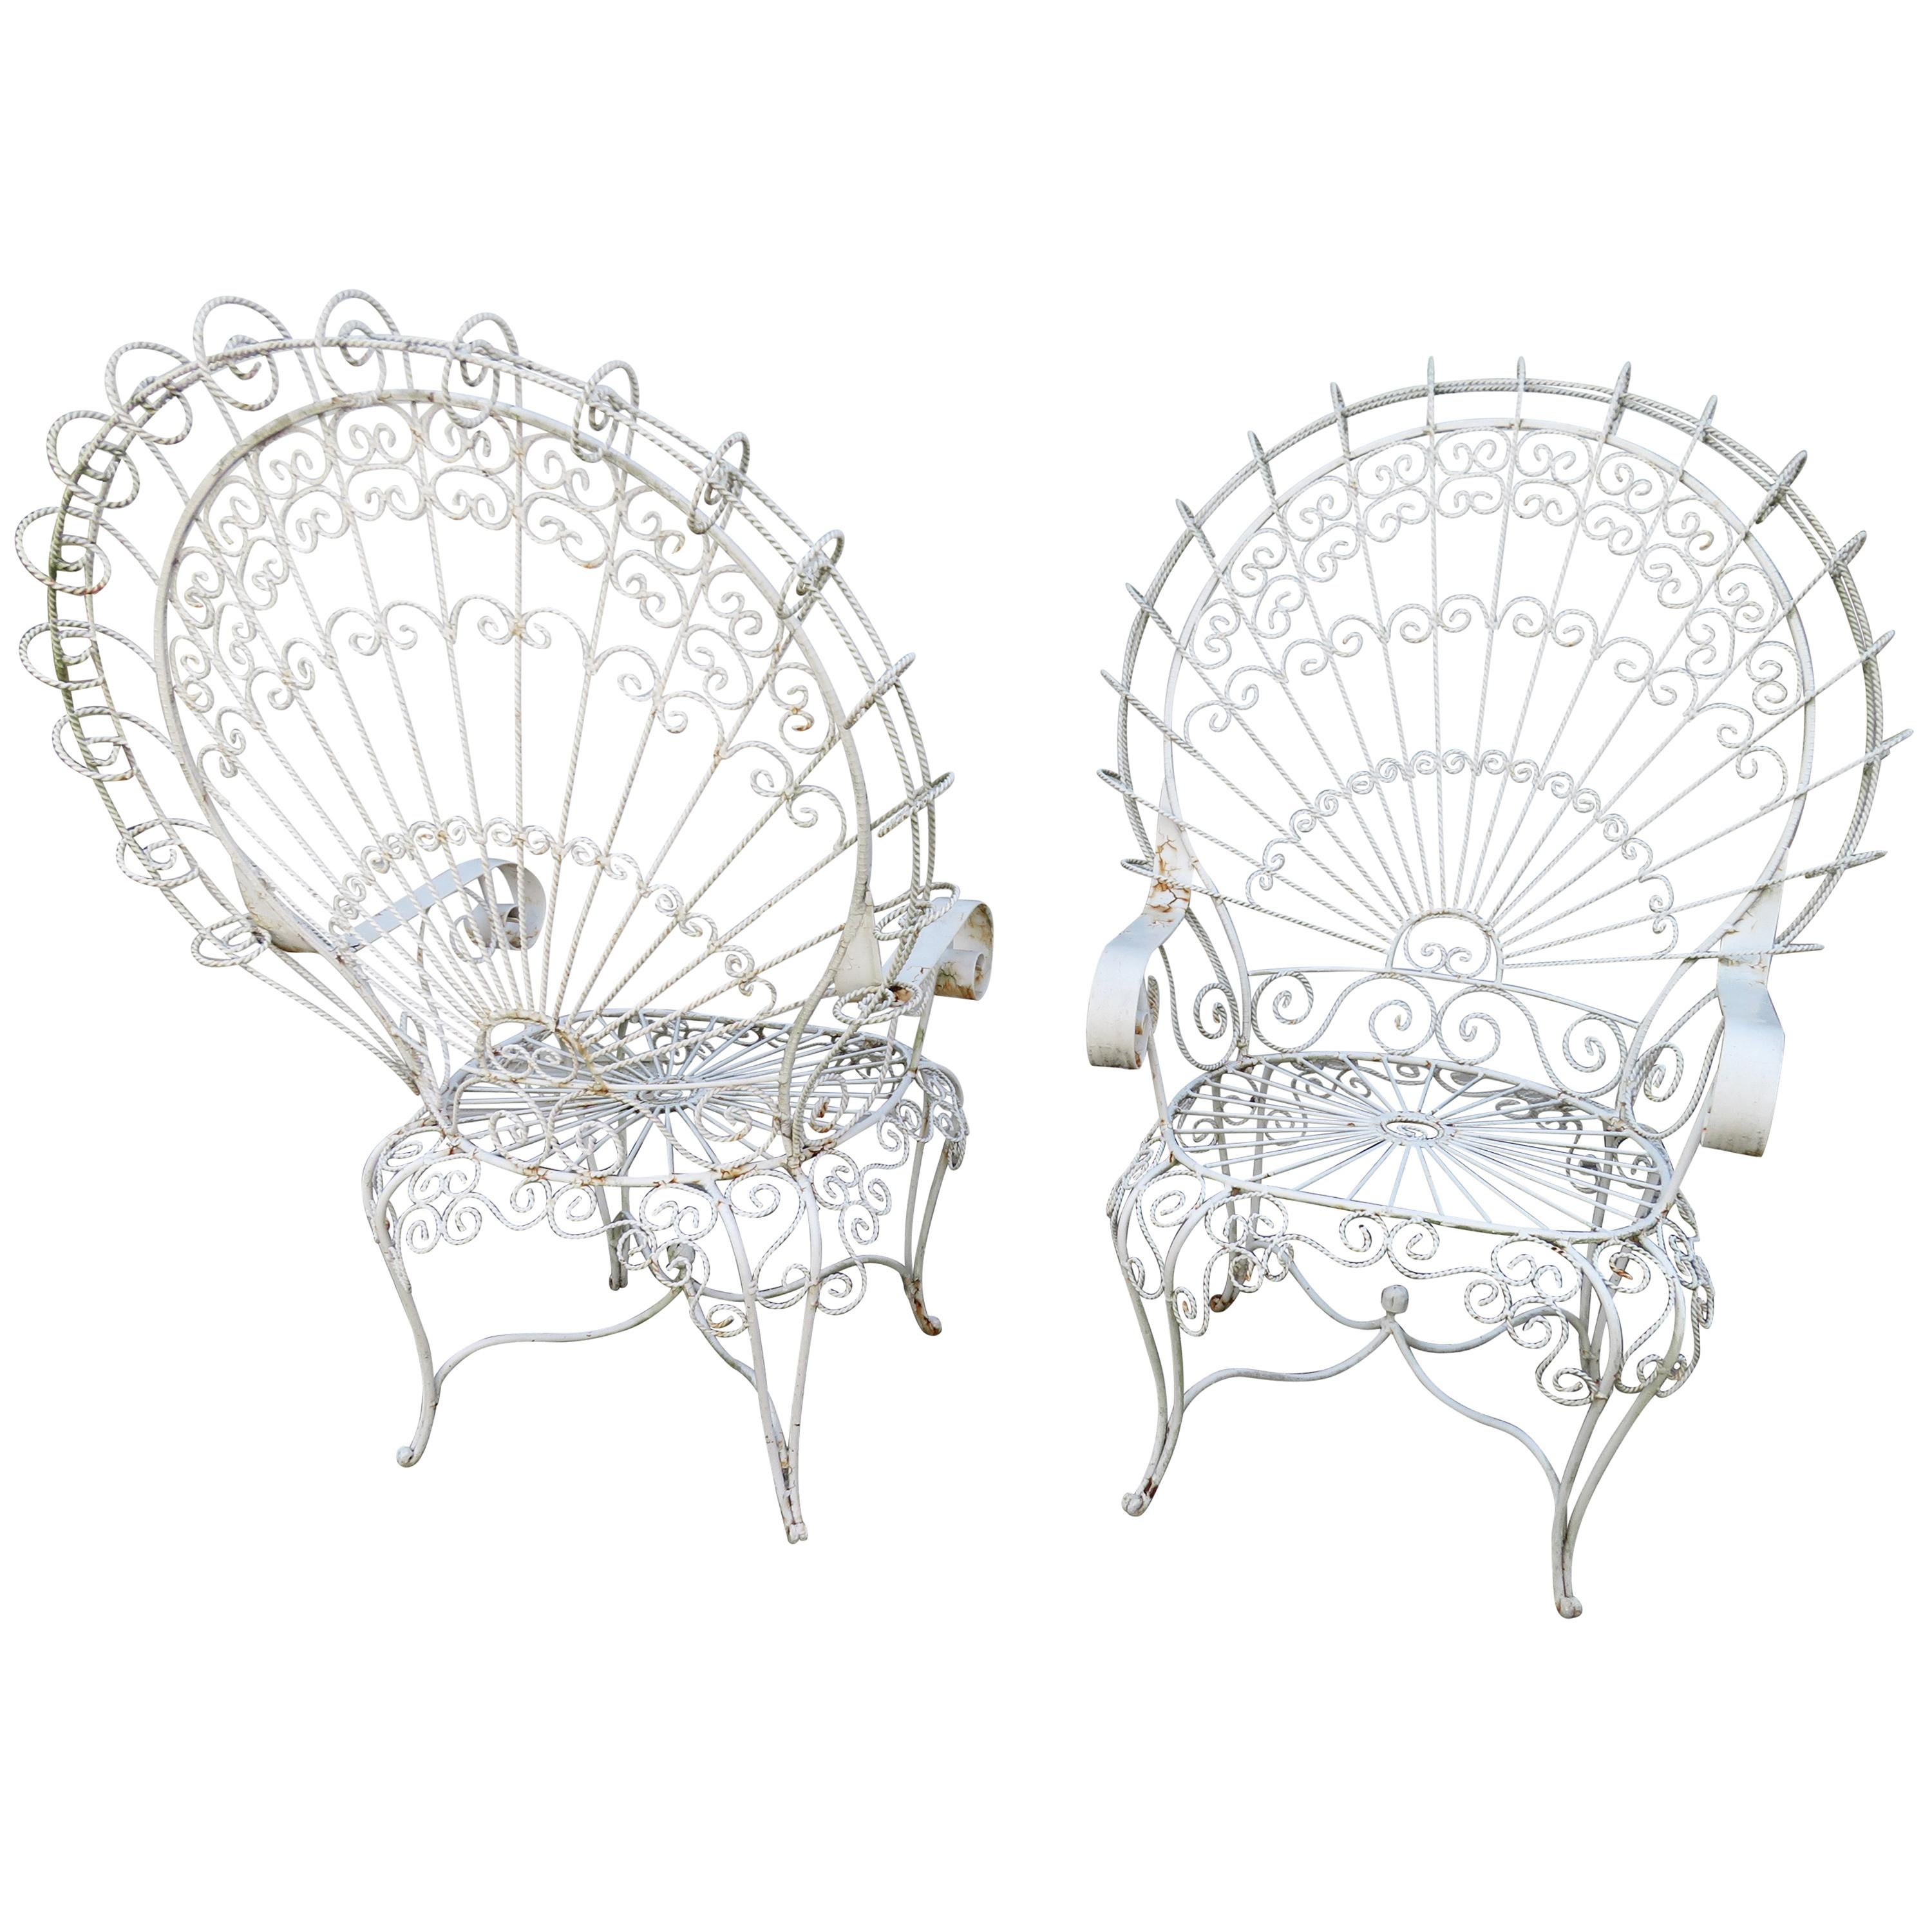 Gorgeous Pair of Salterini Style Wrought Iron Fan Back Peacock Patio Chairs